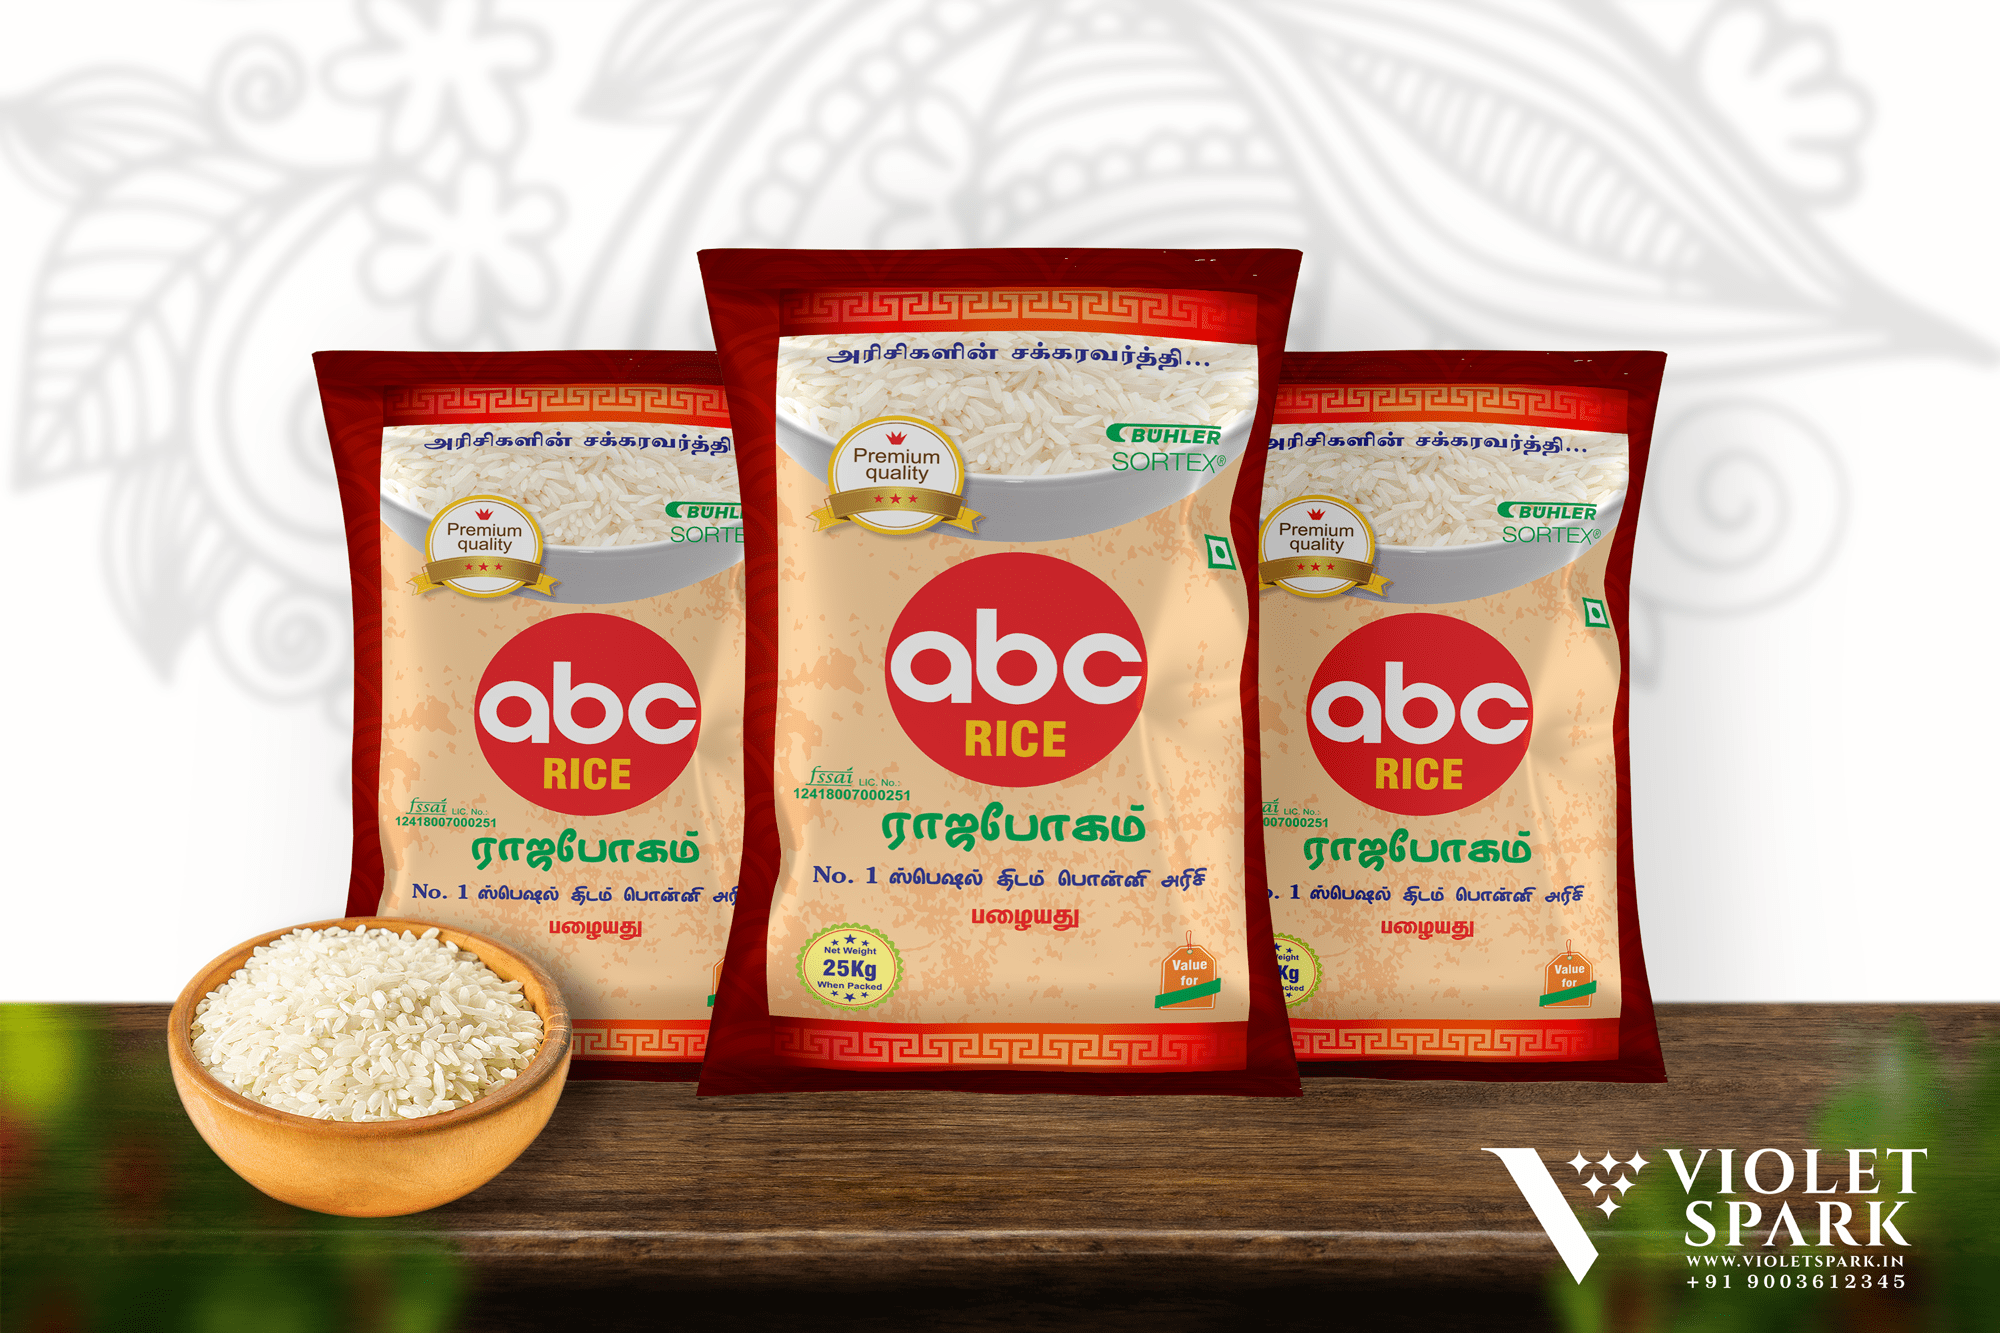 ABC Brand Rajabhogam Rice Bags Branding & Packaging Design in Erode by Creative Prints thecreativeprints